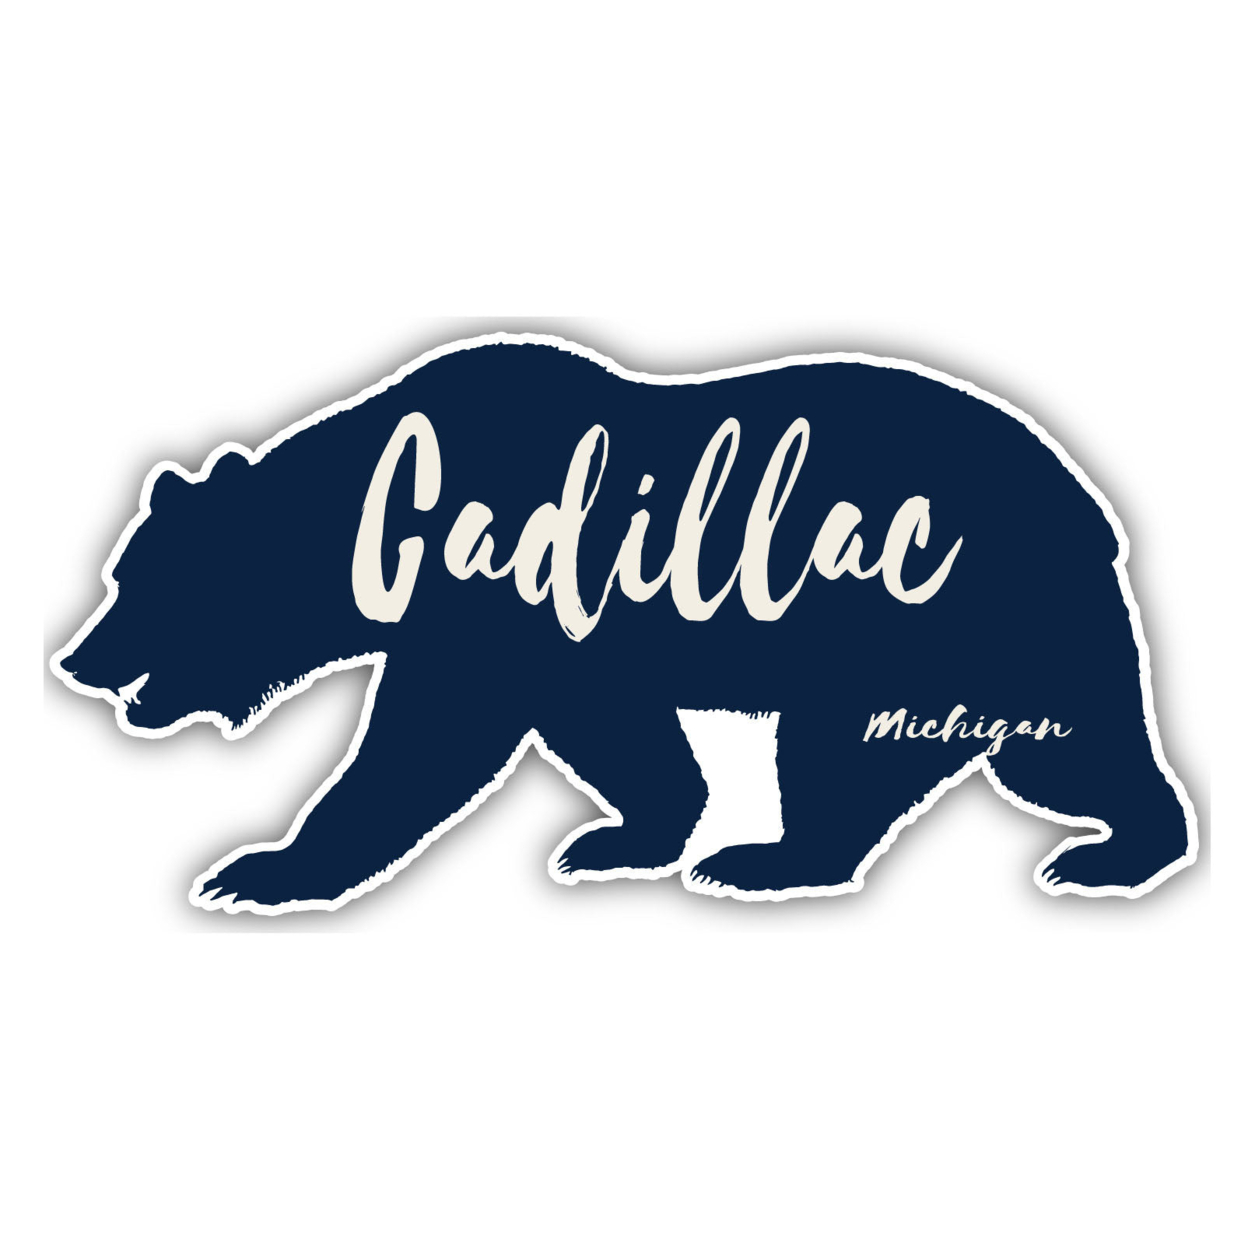 Cadillac Michigan Souvenir Decorative Stickers (Choose Theme And Size) - Single Unit, 4-Inch, Great Outdoors